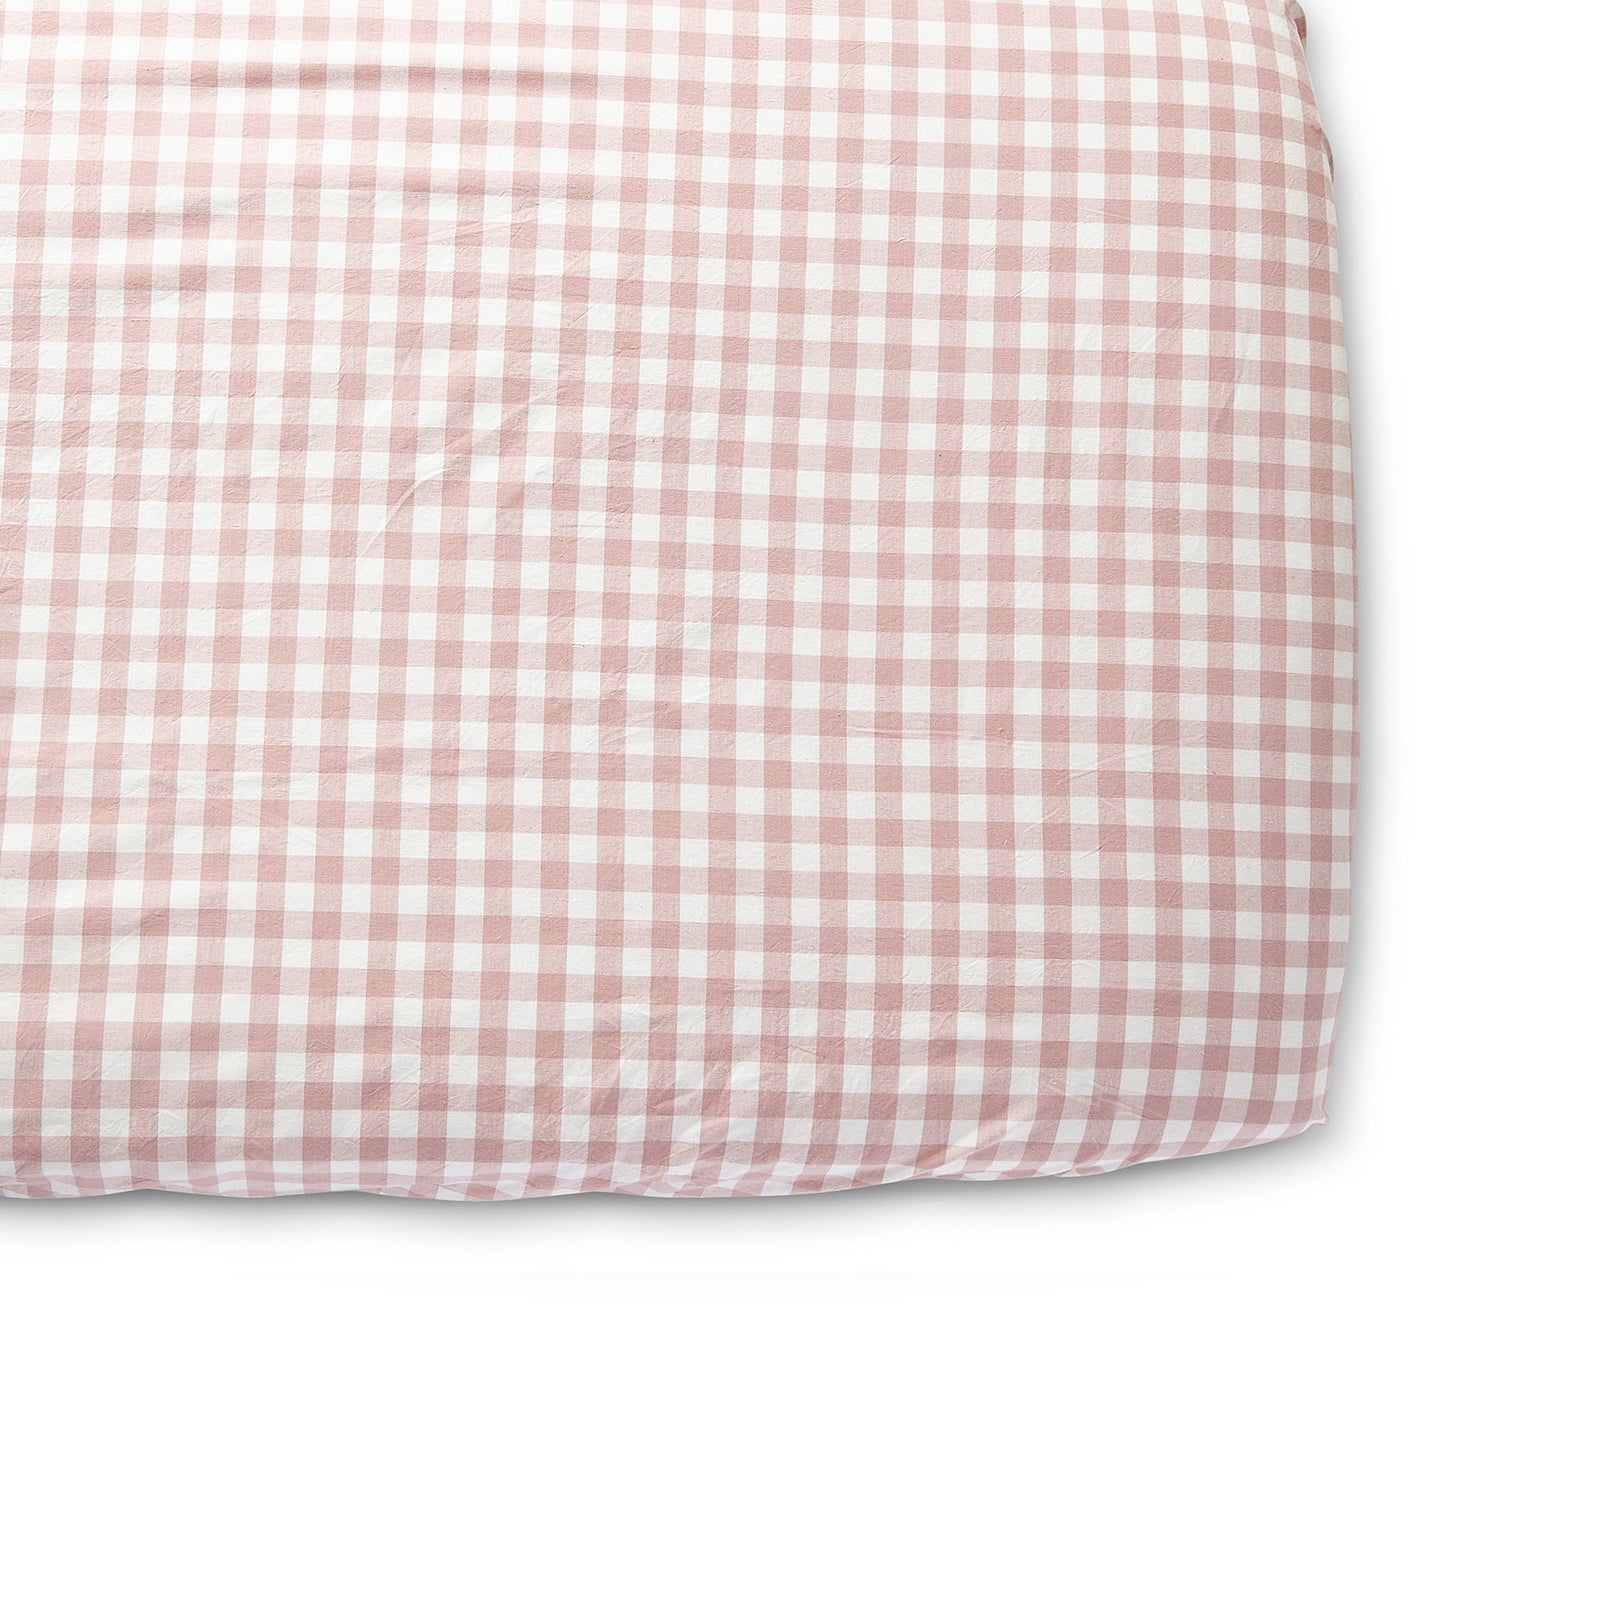 Pehr Checkmate Blossom Organic Crib Sheet. GOTS Certified Organic Cotton. Screen printed by hand using AZO-Free dyes. White with pink checks.